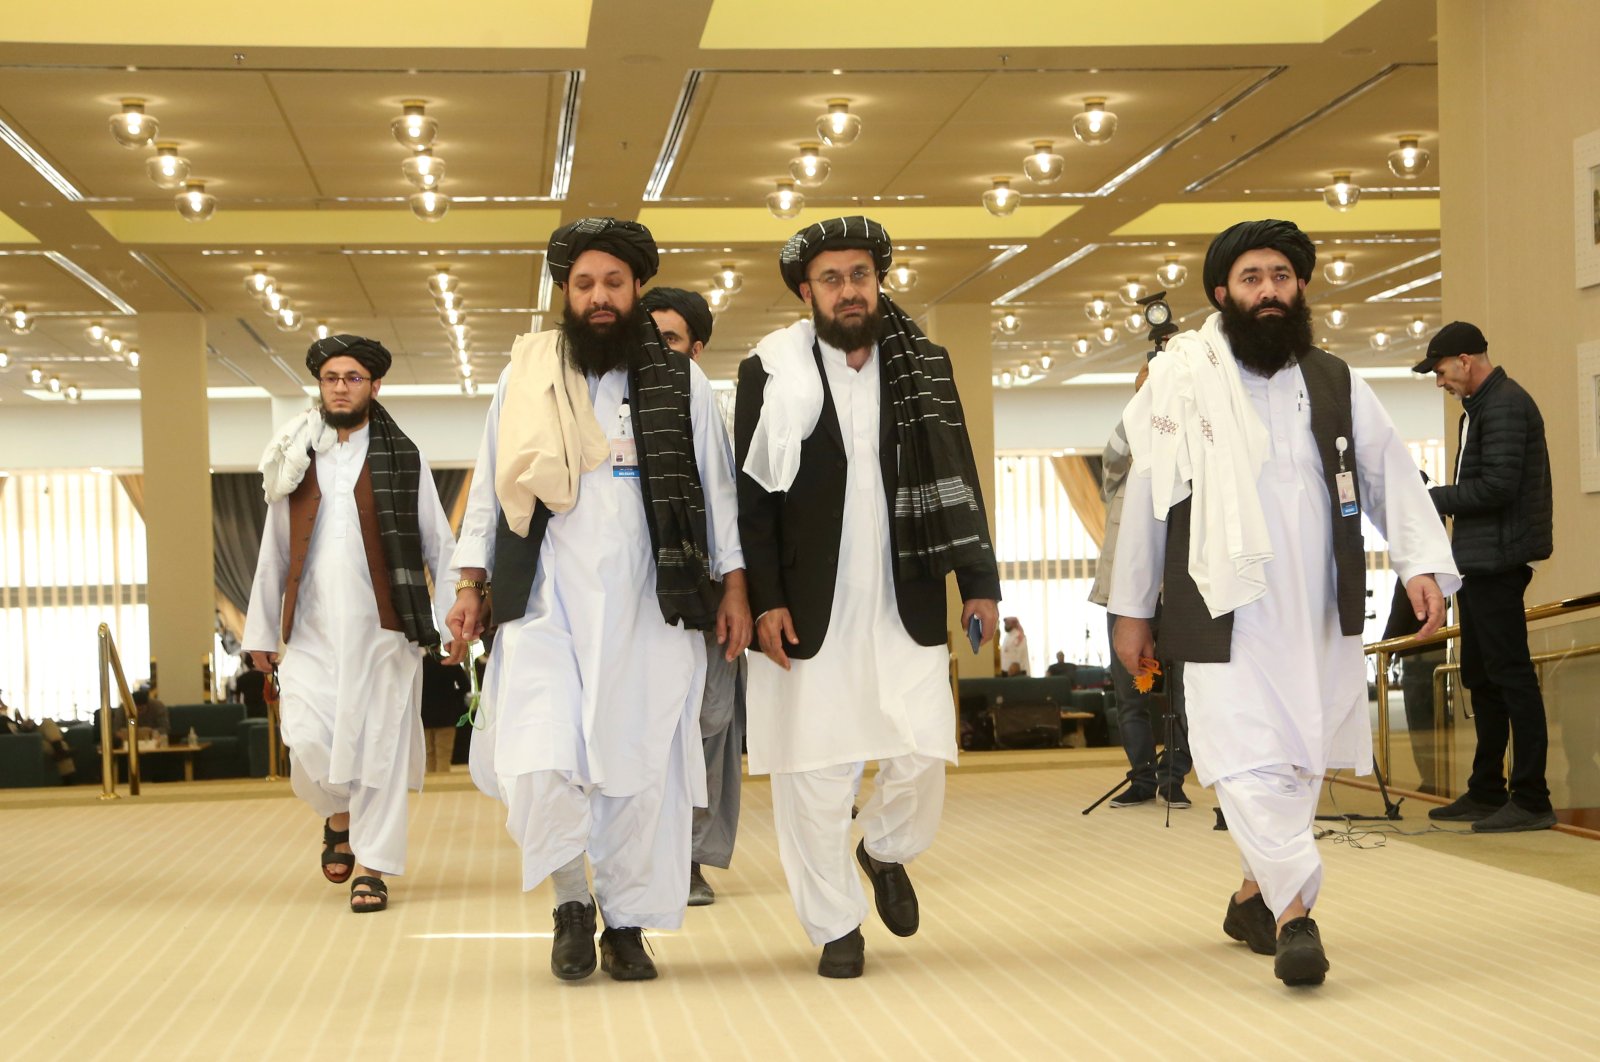 Afghanistan's Taliban delegation arrive for the agreement signing between Taliban and U.S. officials in Doha, Qatar on Feb. 29, 2020. (AP Photo)